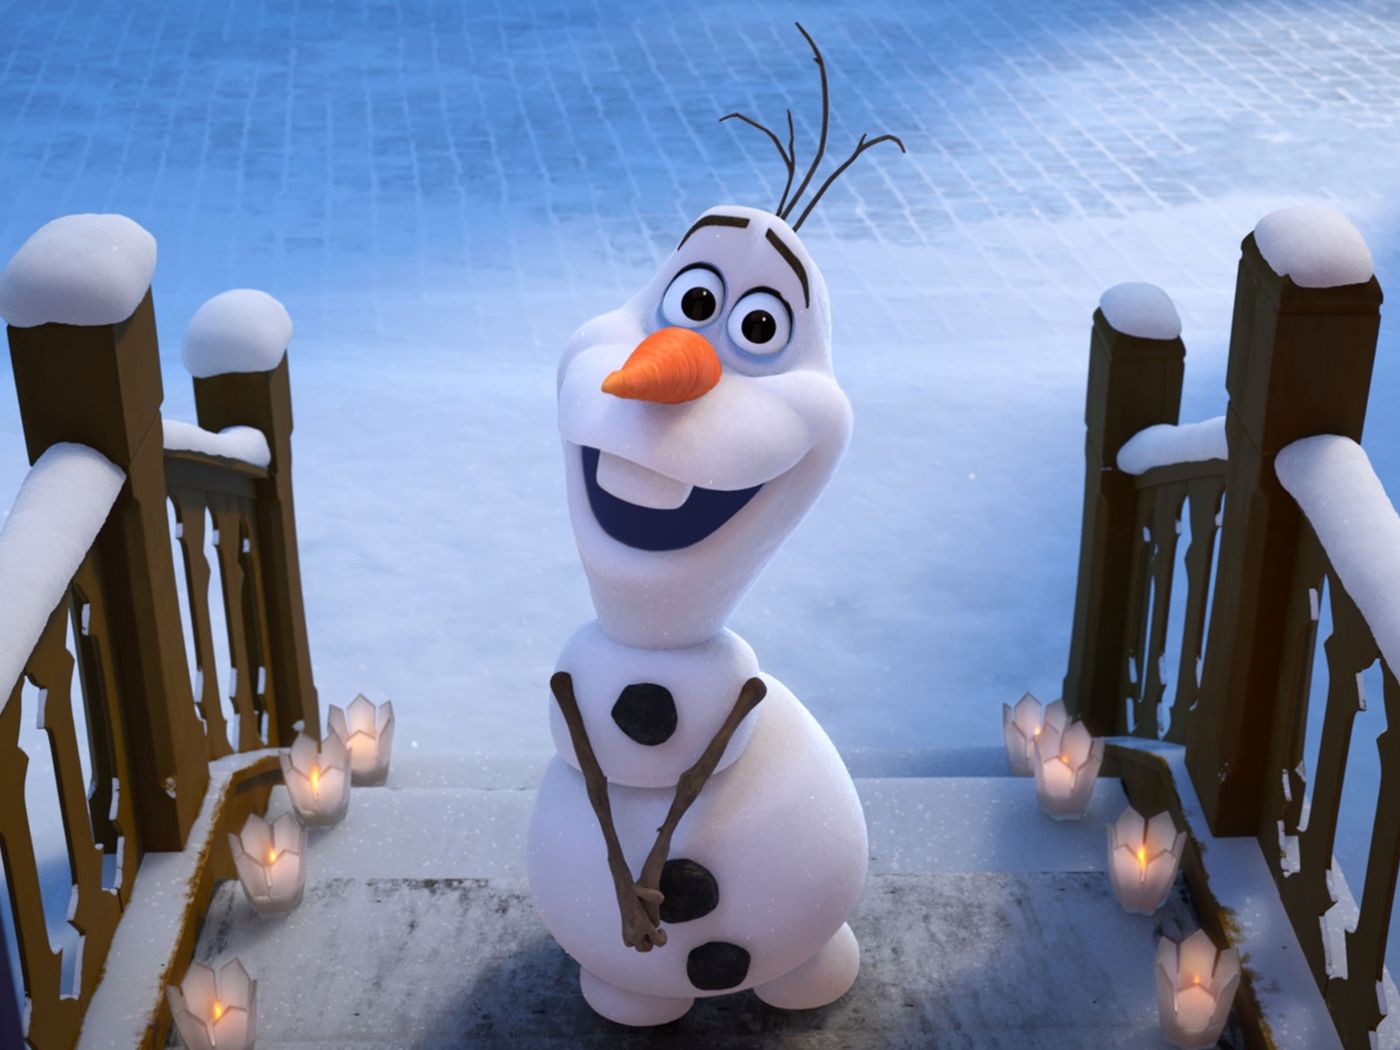 Disney+ is Dropping New ‘Frozen’ Short Series Produced From Home